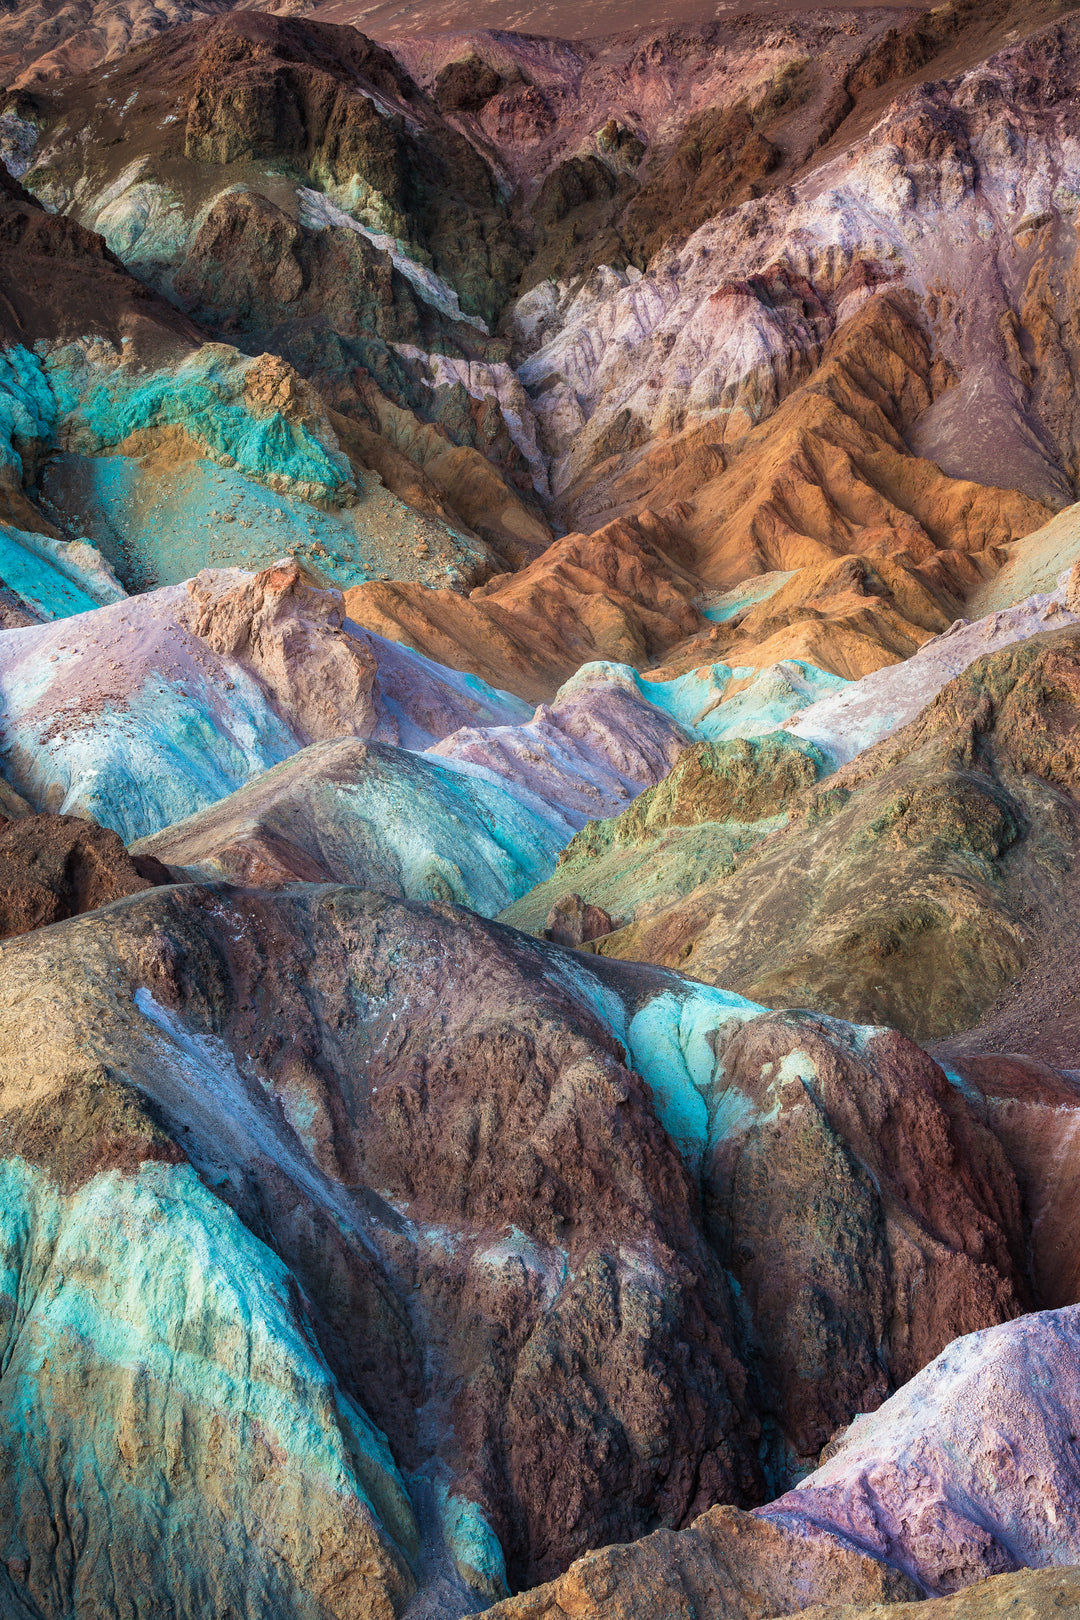 Mountaintops splashed with blue, purple, pink orange and teal colors.